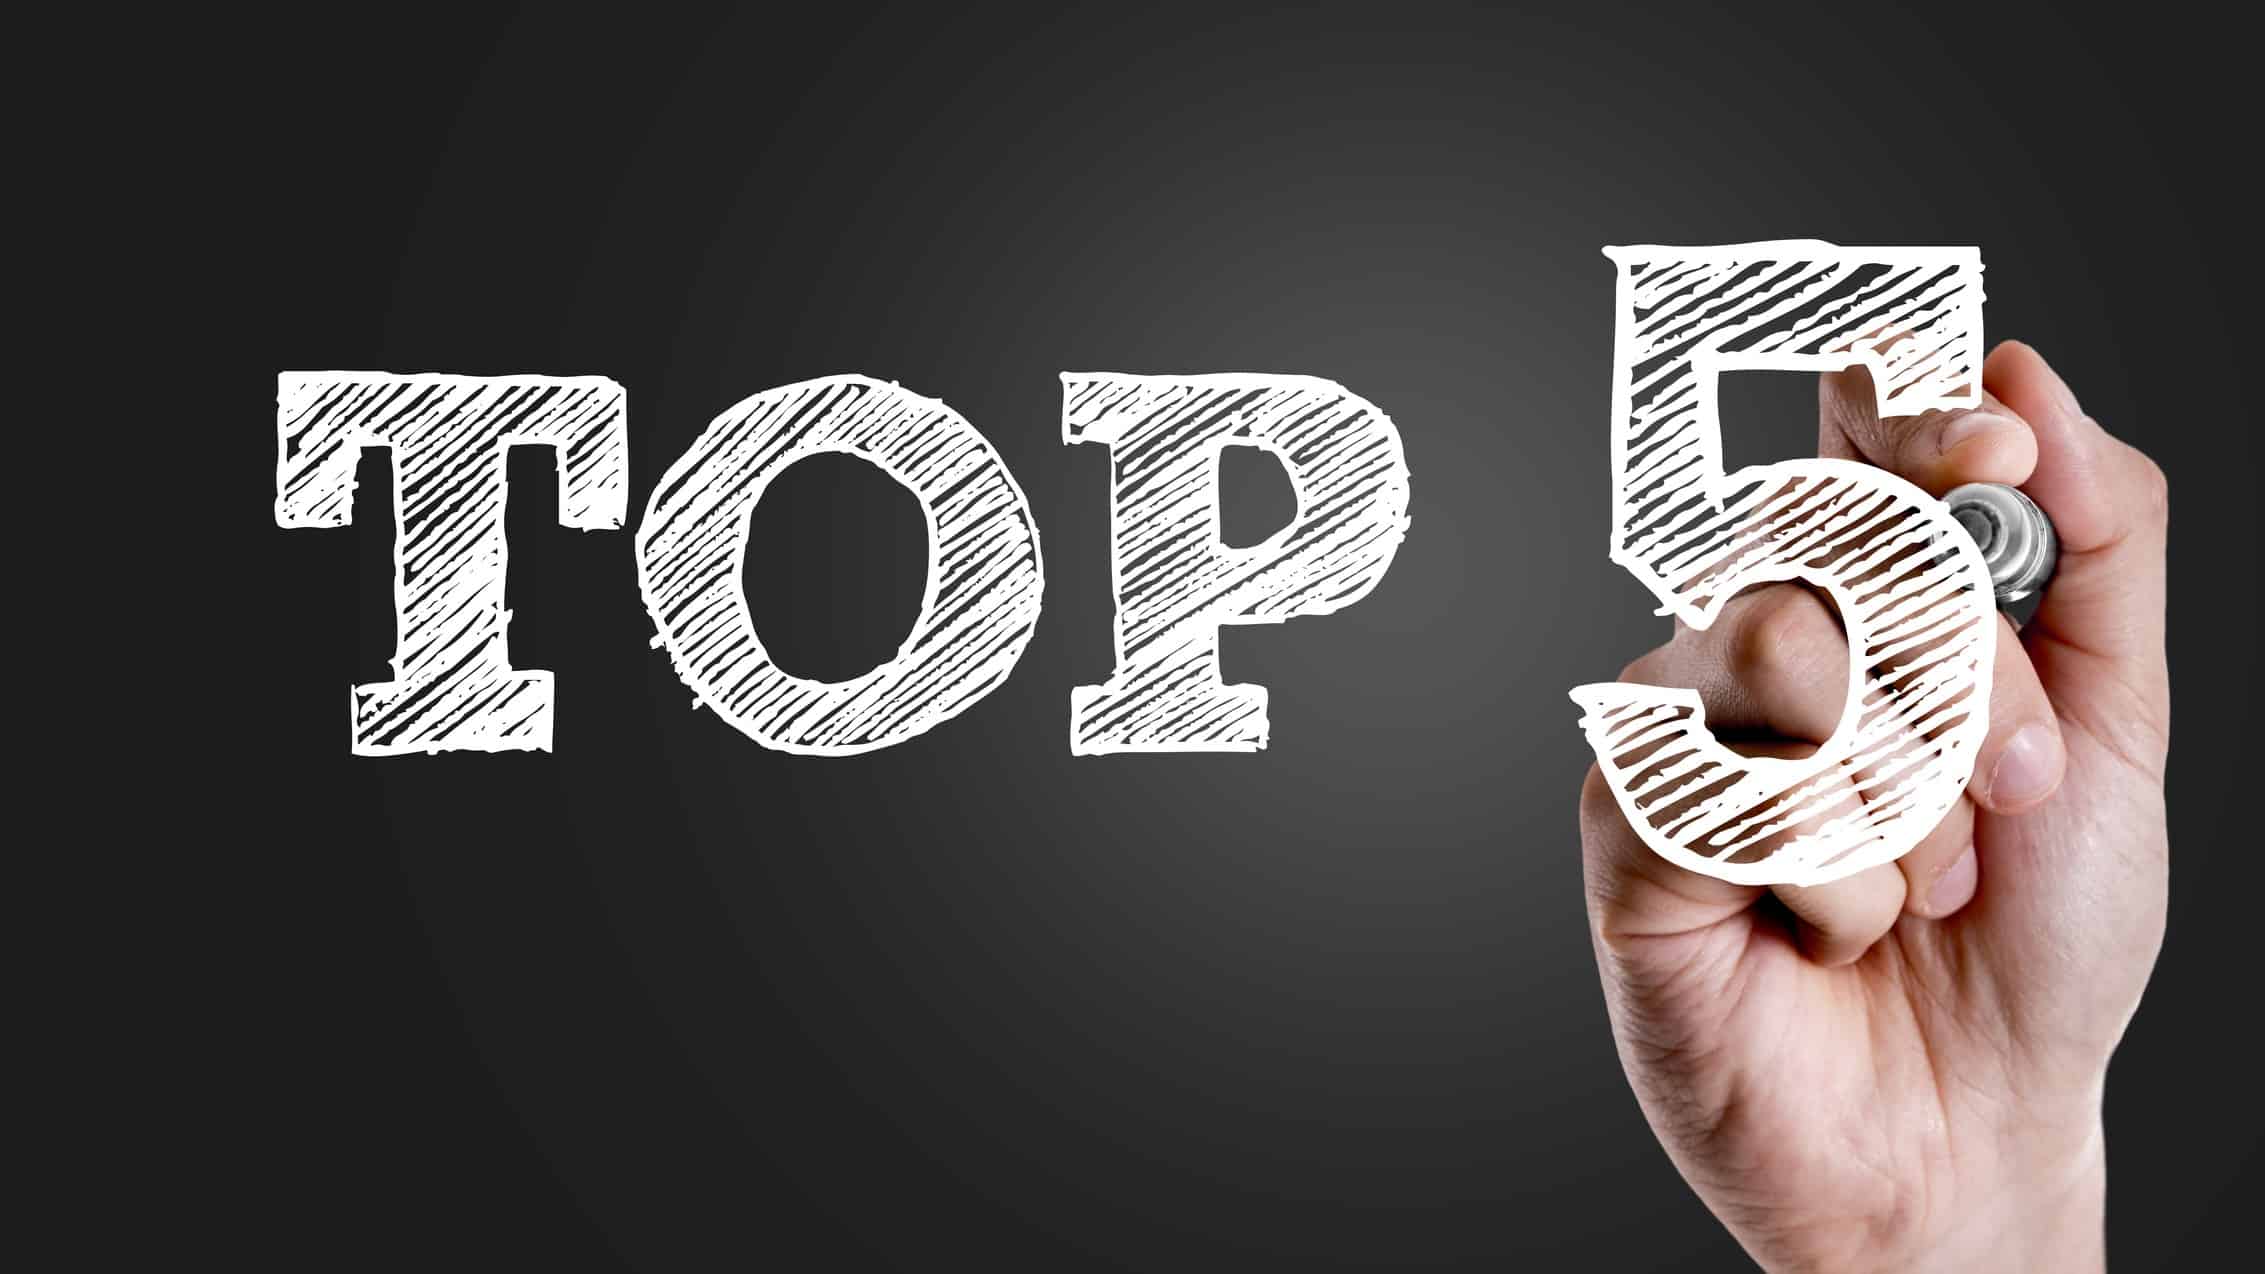 Hand writing Top 5 in white pen